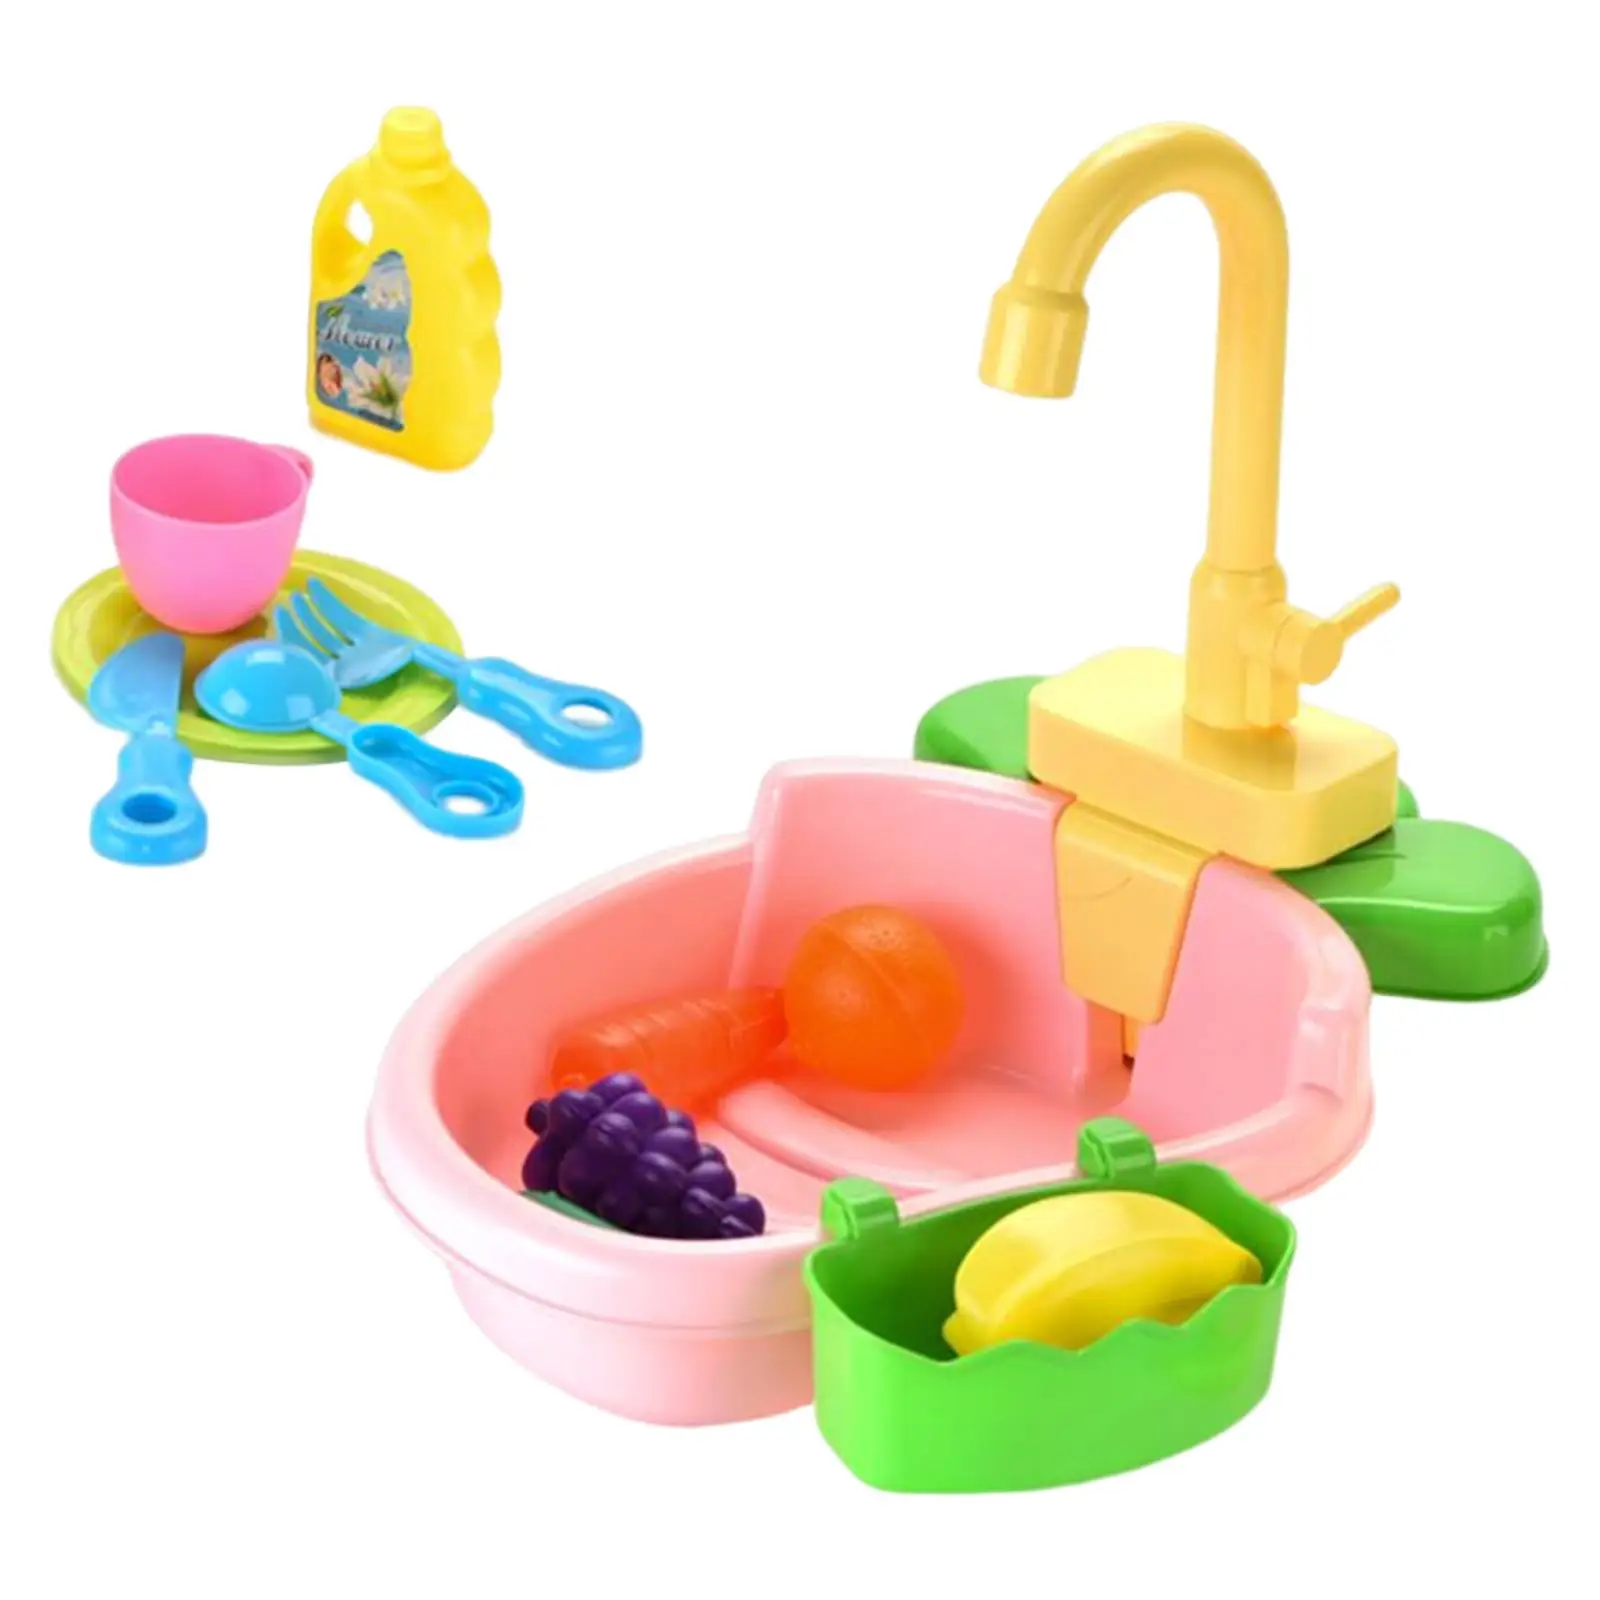 Kids Bird Baths Tub with Running Water Pretend Automatic Faucet and Accessories Play Sink for Role Play Birds Parrots